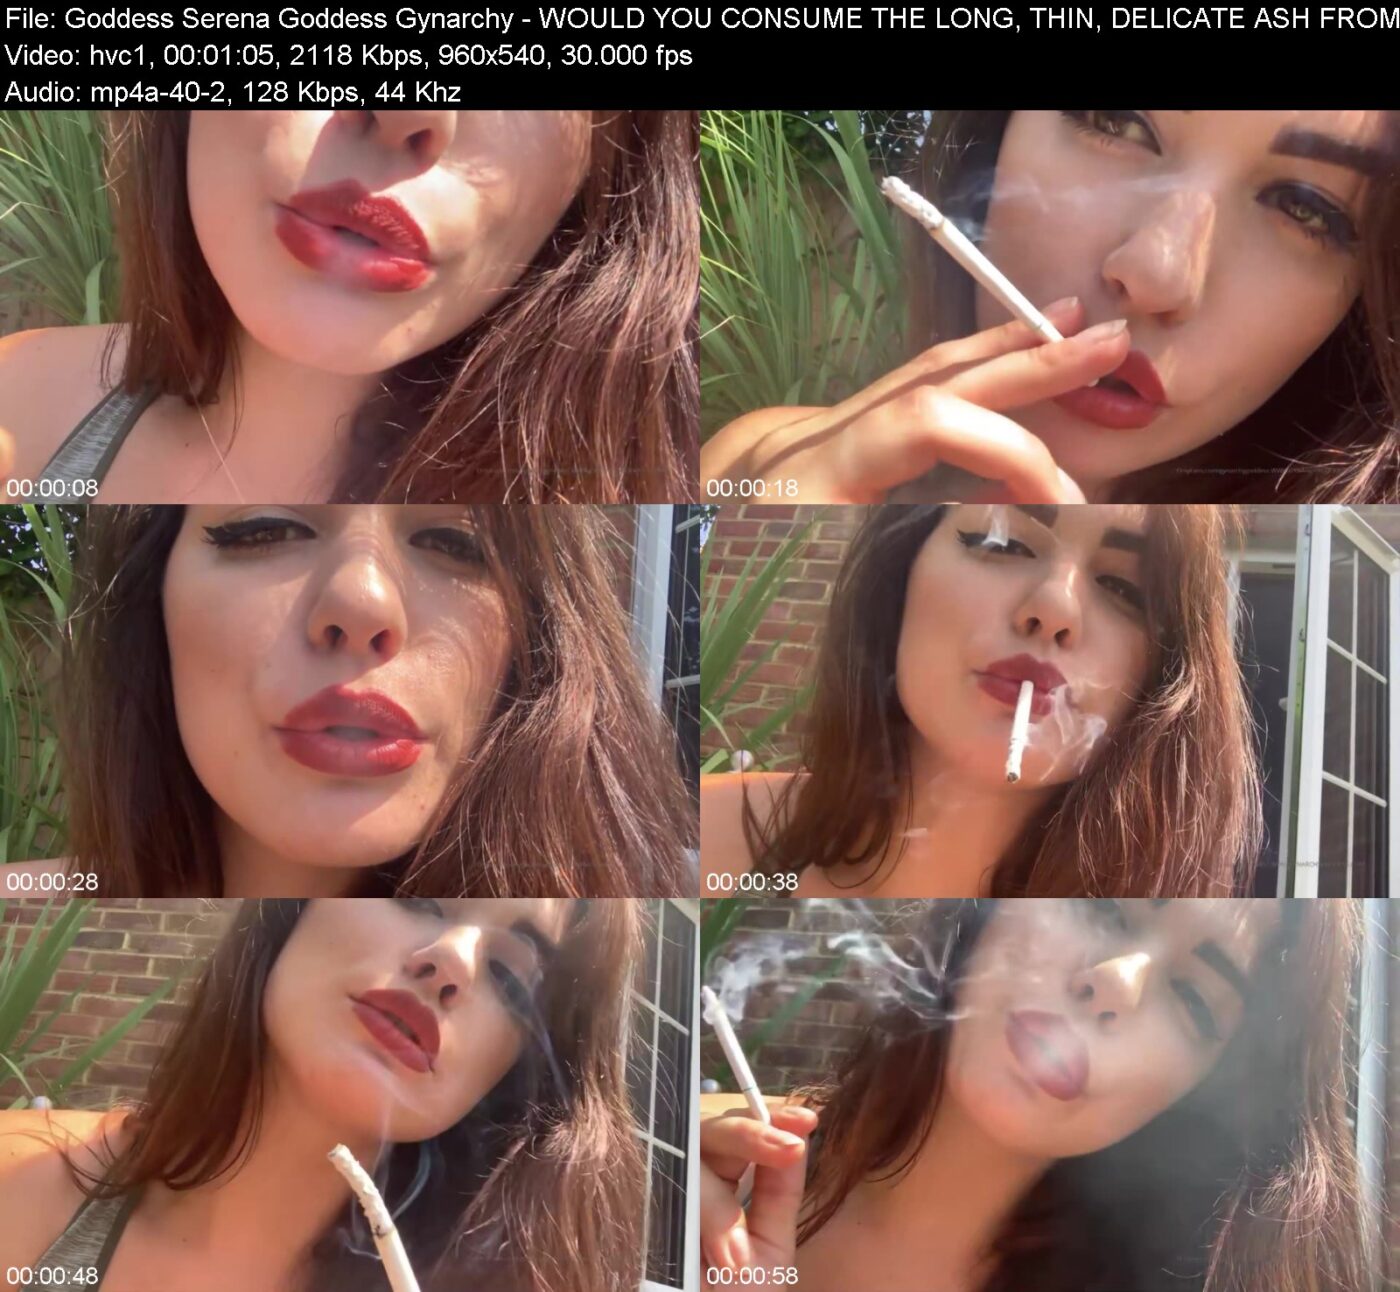 Actress: Goddess Serena Goddess Gynarchy. Title and Studio: WOULD YOU CONSUME THE LONG, THIN, DELICATE ASH FROM THE BOTTOM OF MY SUPER SLIM CIGARETTE